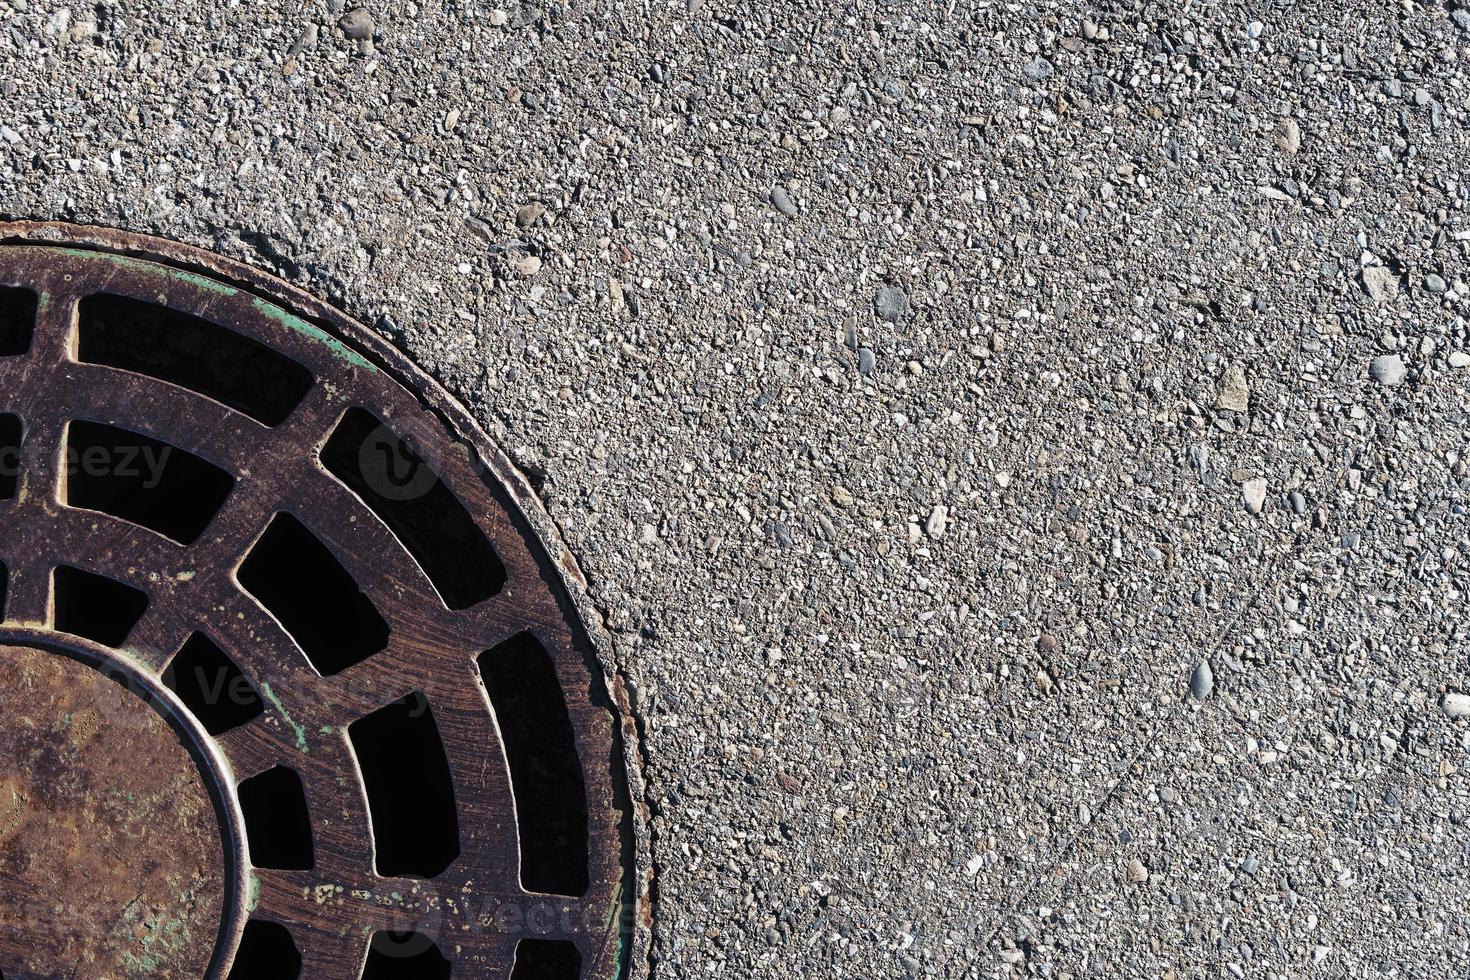 Sewer round hatch with a grate on an asphalt road. photo